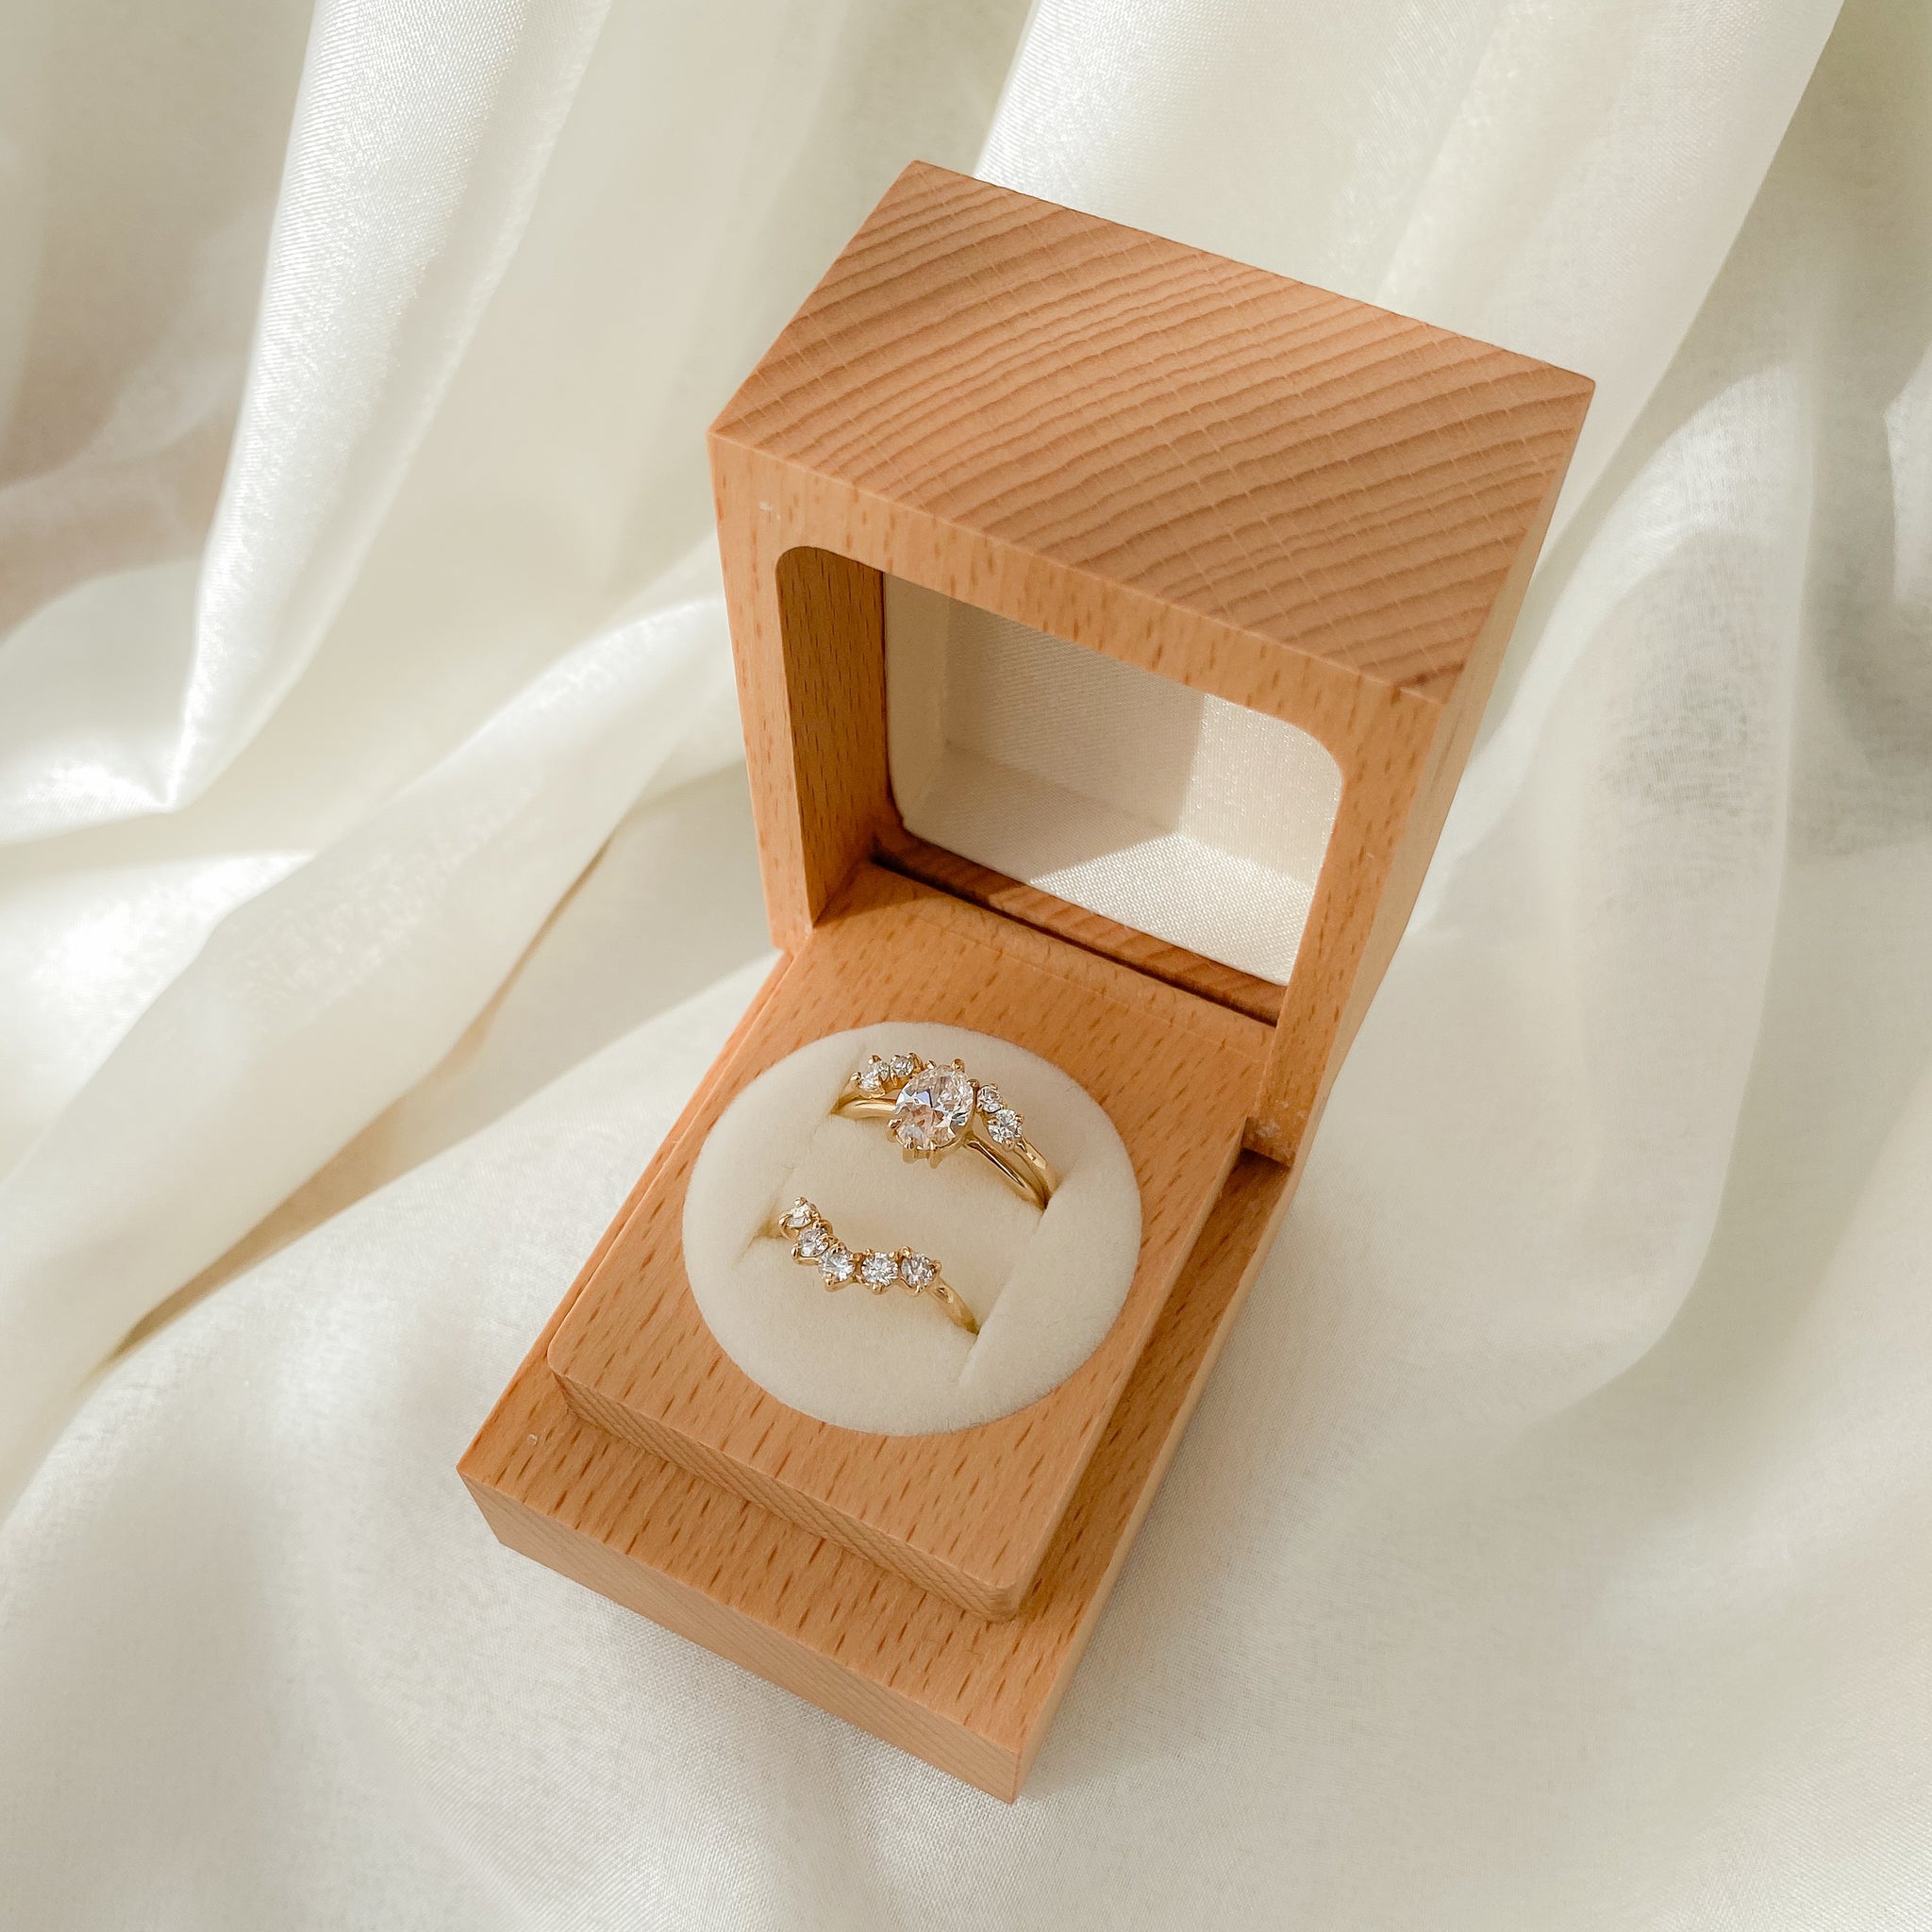 Ring Box for Wedding Ceremony, Wooden Ring Bearer Box, Velvet Ring Box for  Propsal, Jewelry Display Box for 2 Wedding Rings, Valentine Gift Box :  Amazon.in: Jewellery